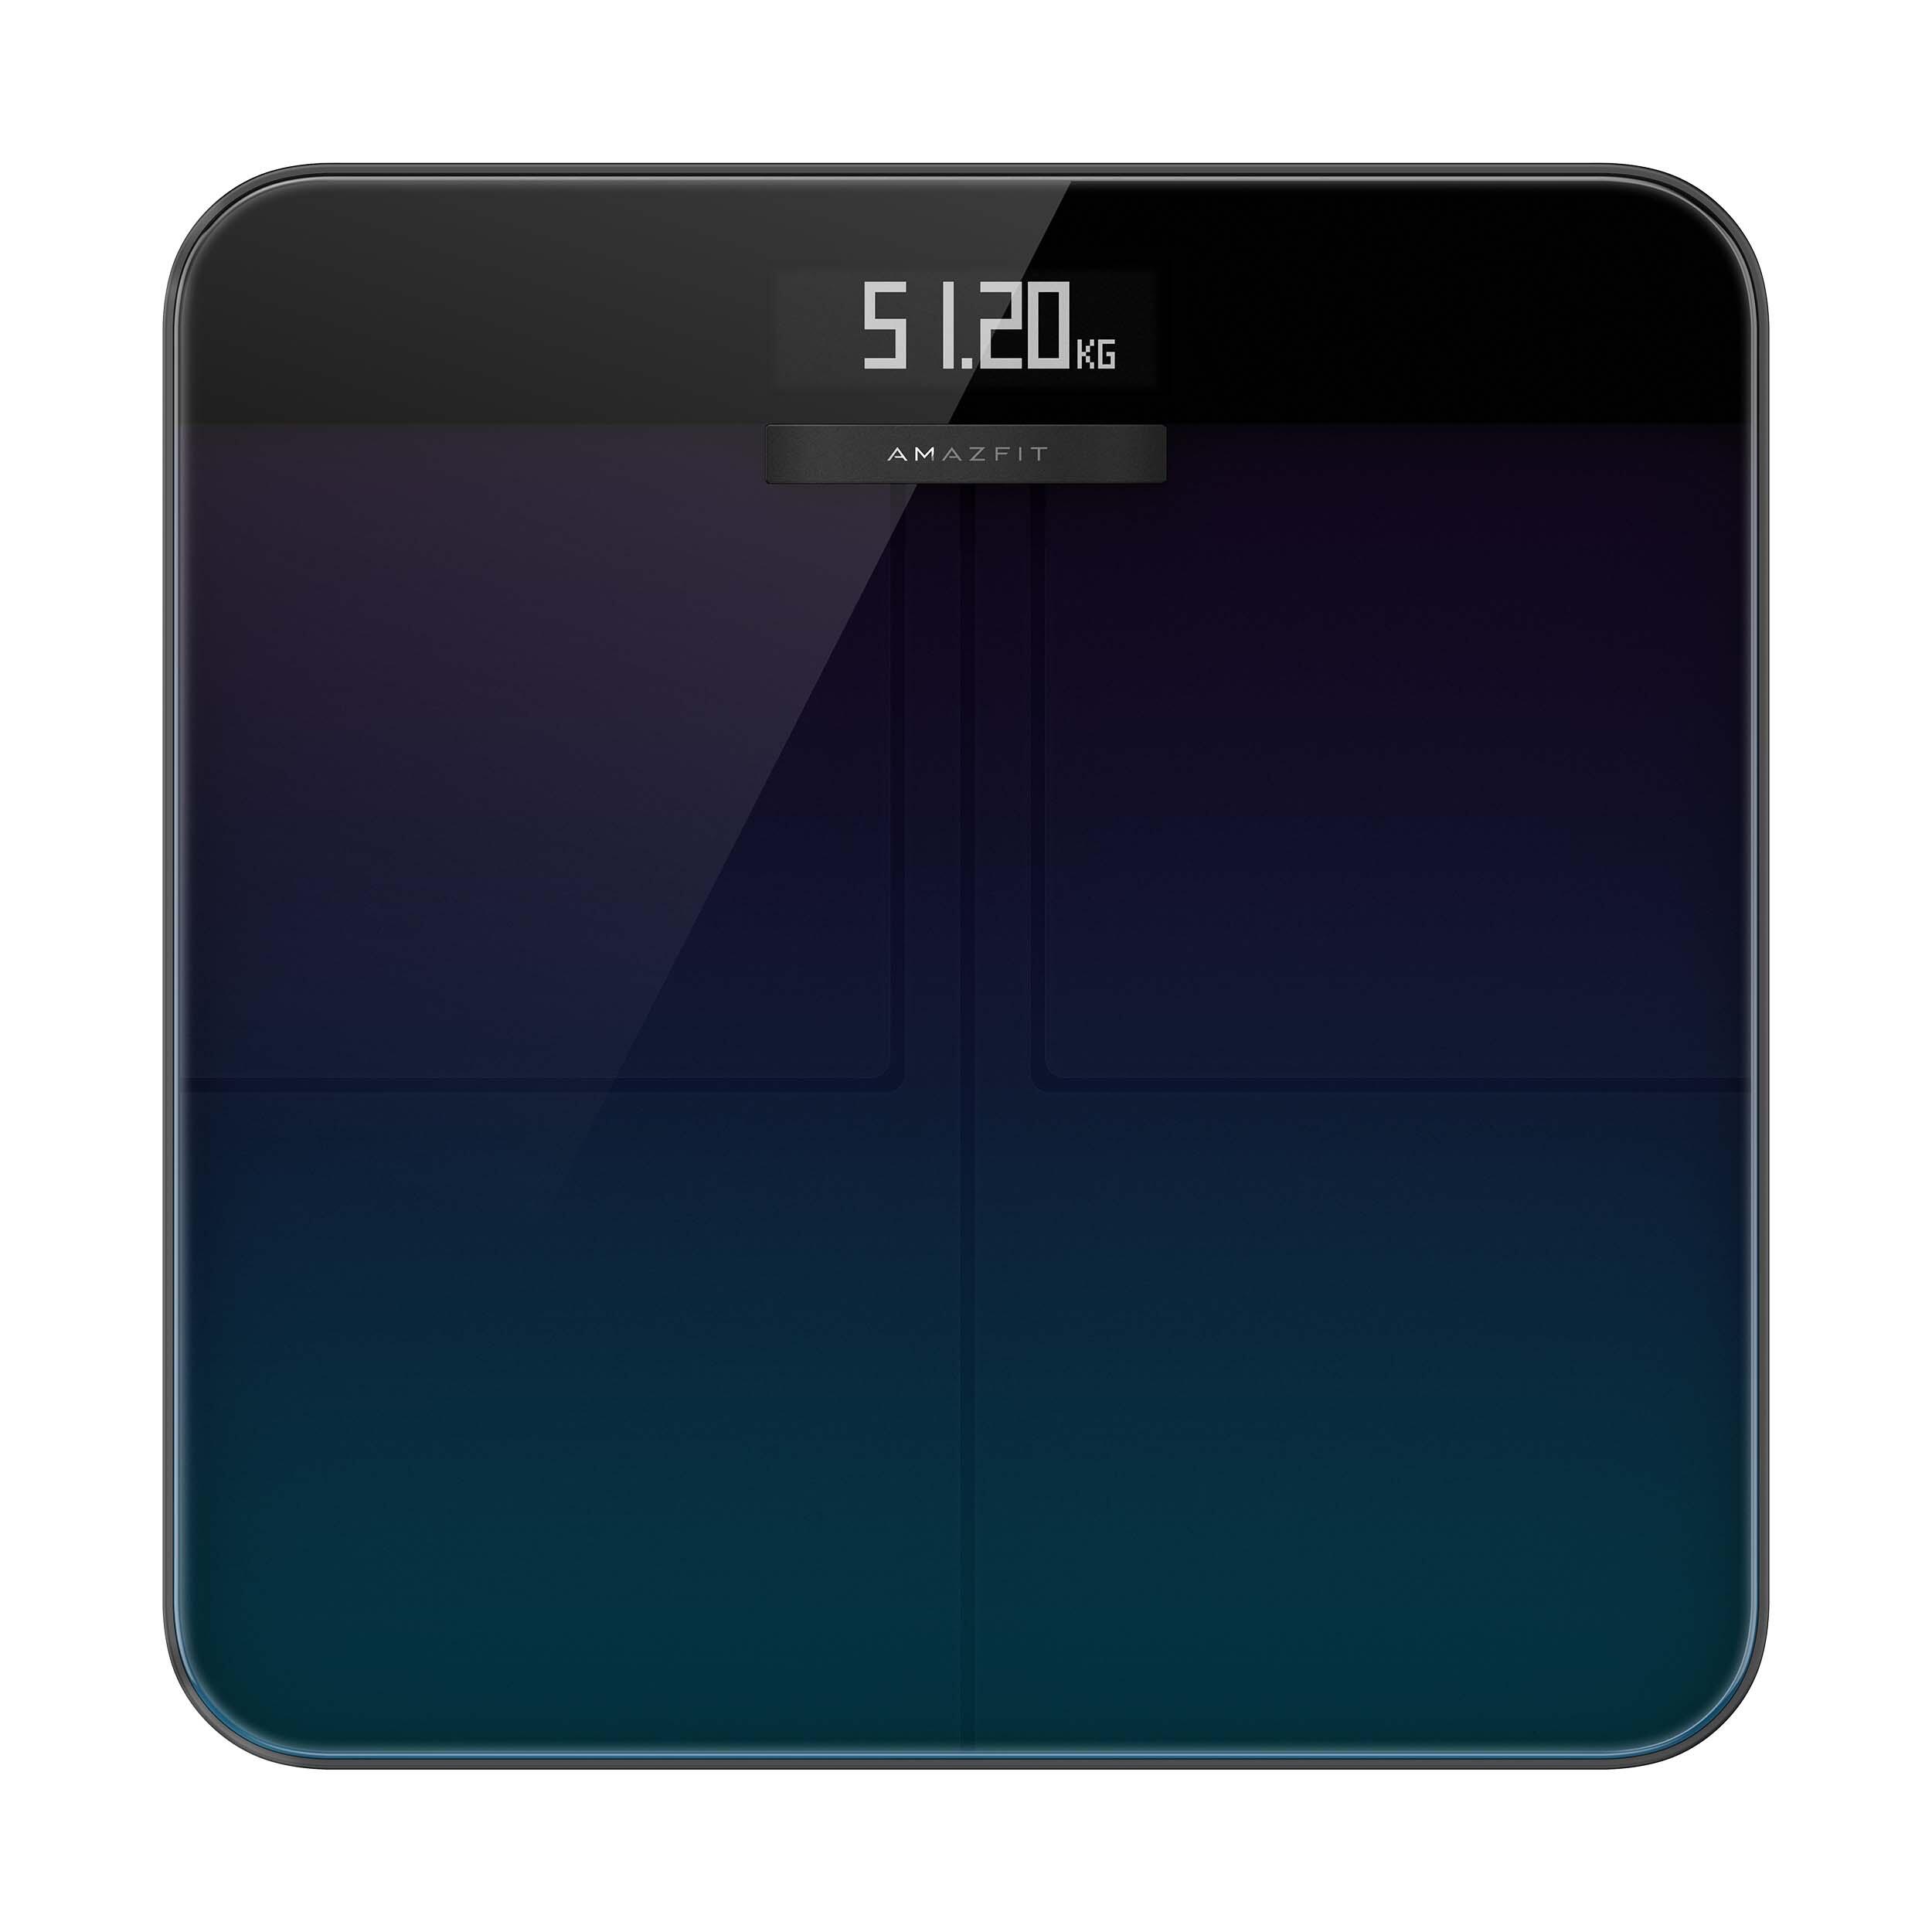 Amazfit Multi-Function Connected Smart Scale 3/5